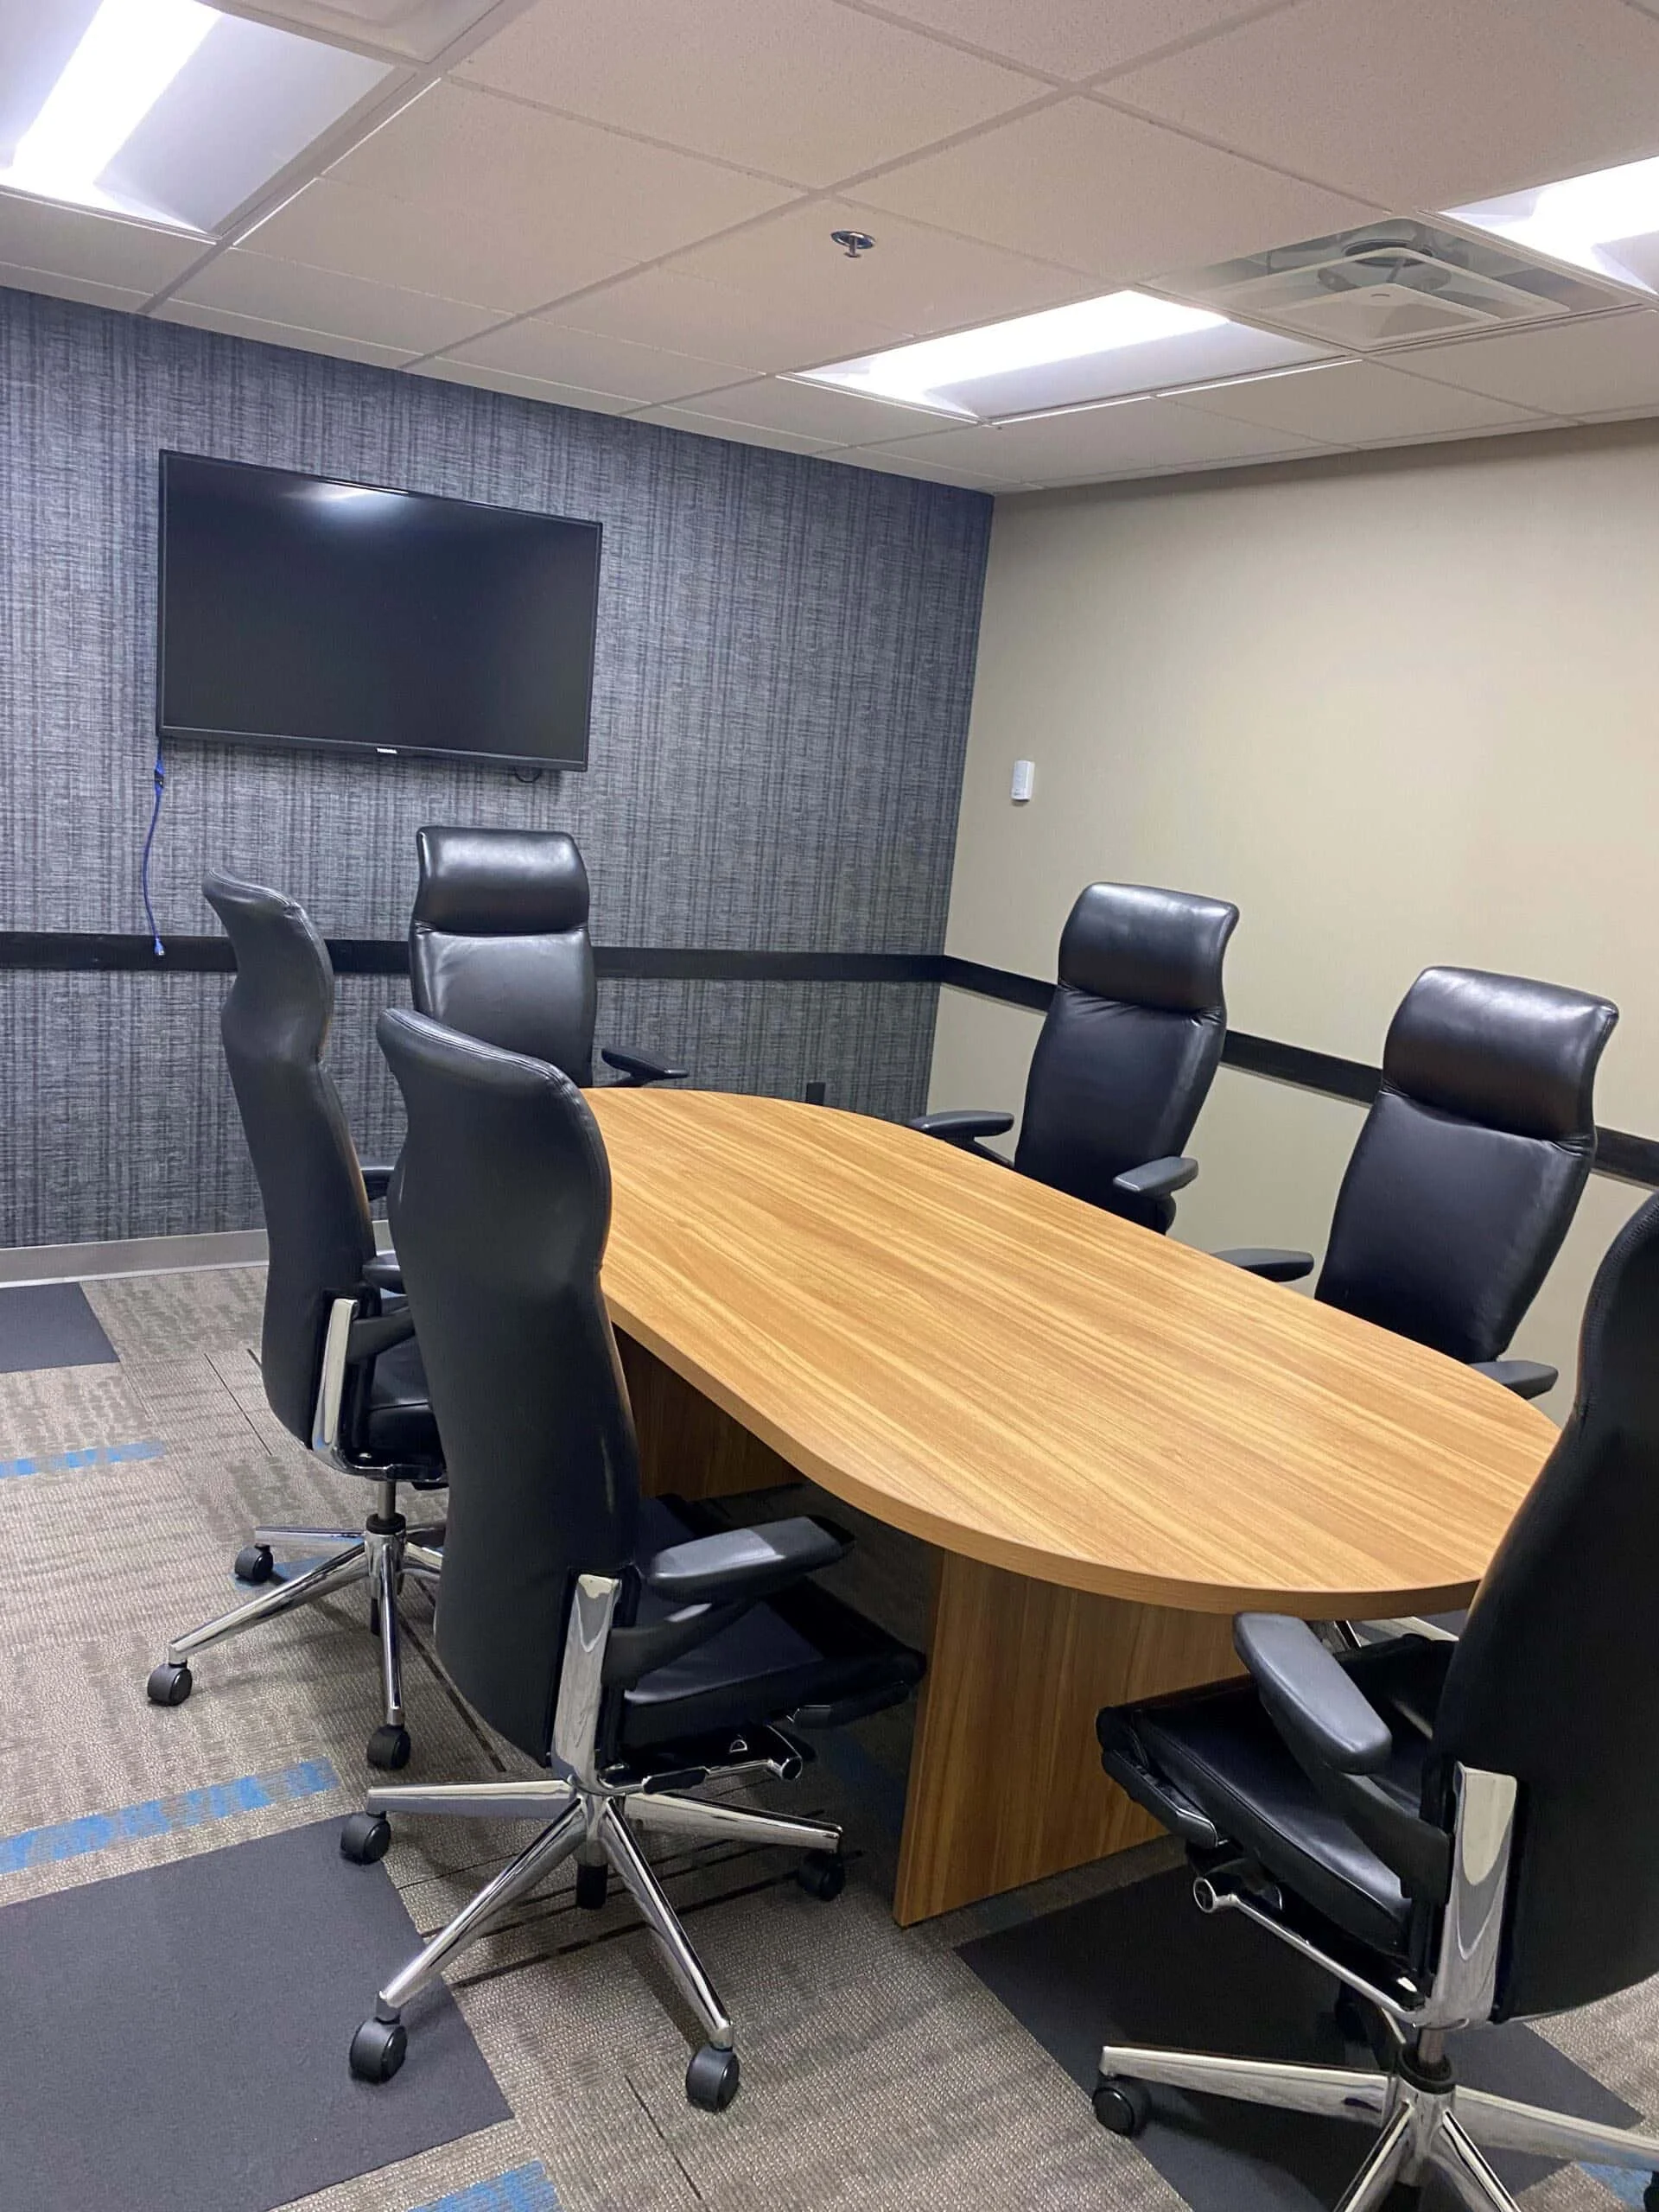 Rent conference room by the hour designed to keep your team or your clients comfortable, creative and focused.